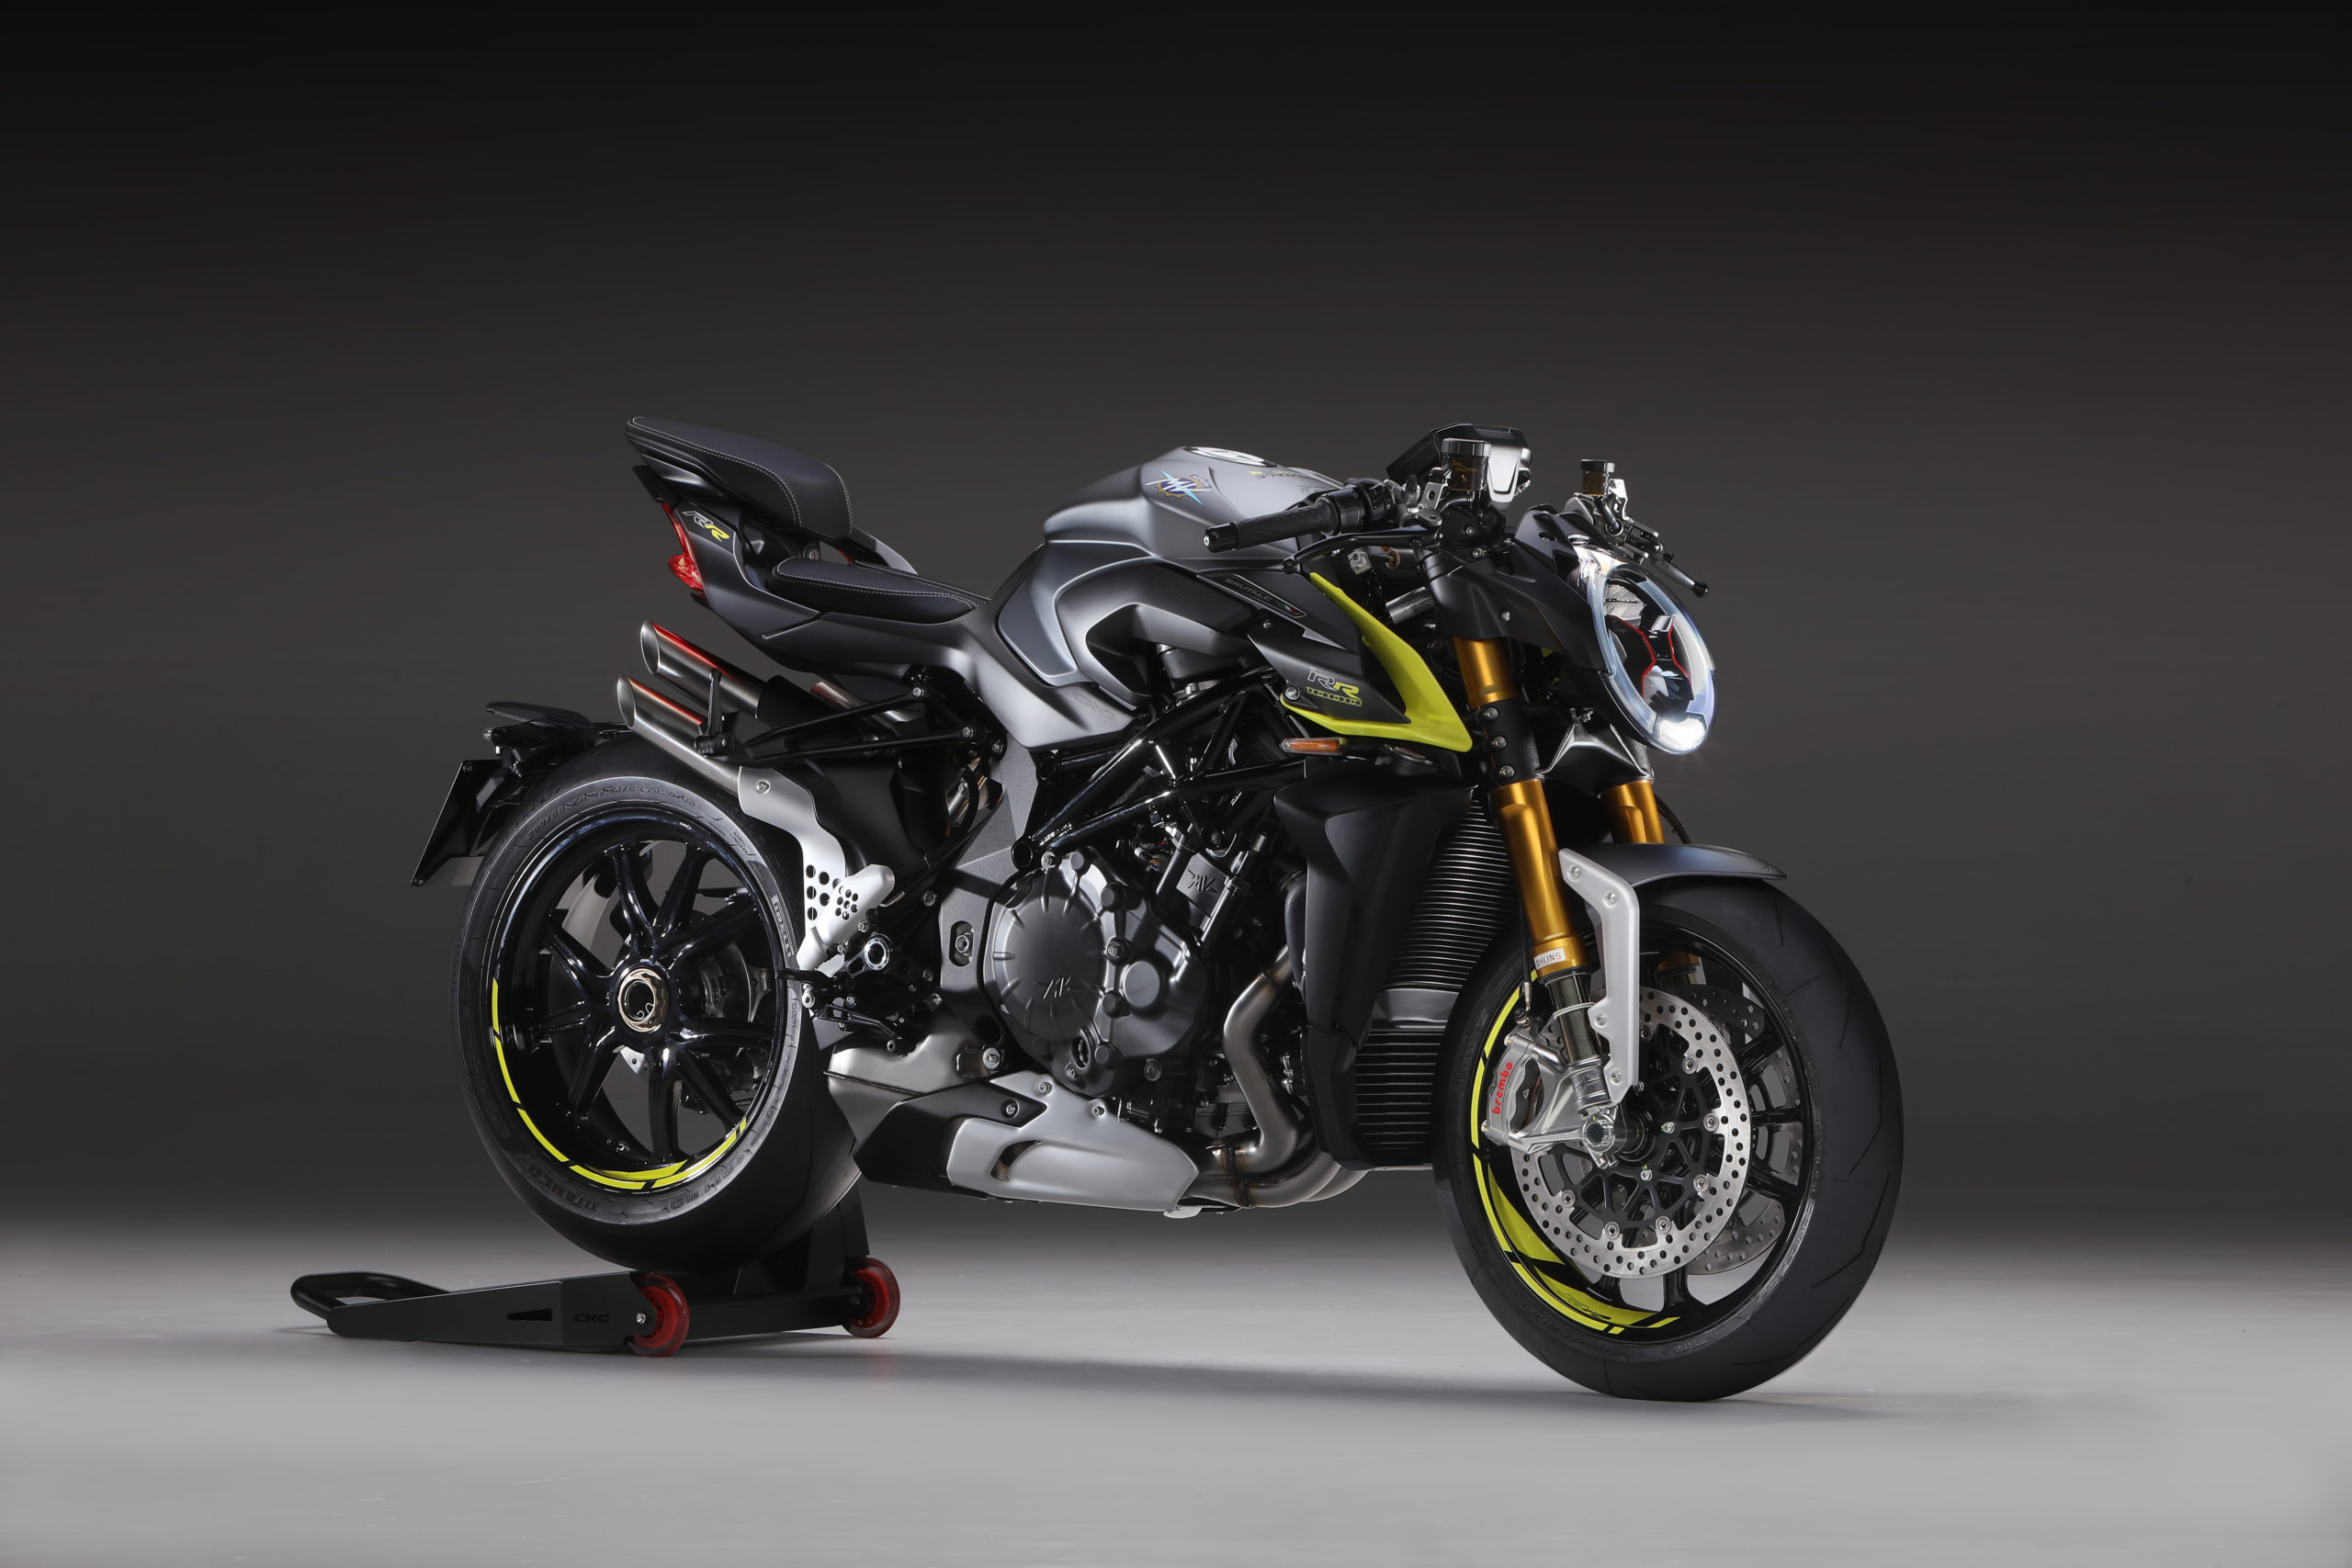 MV Agusta Tames the 208 HP Brutale 1000 RR - DriveMag Riders